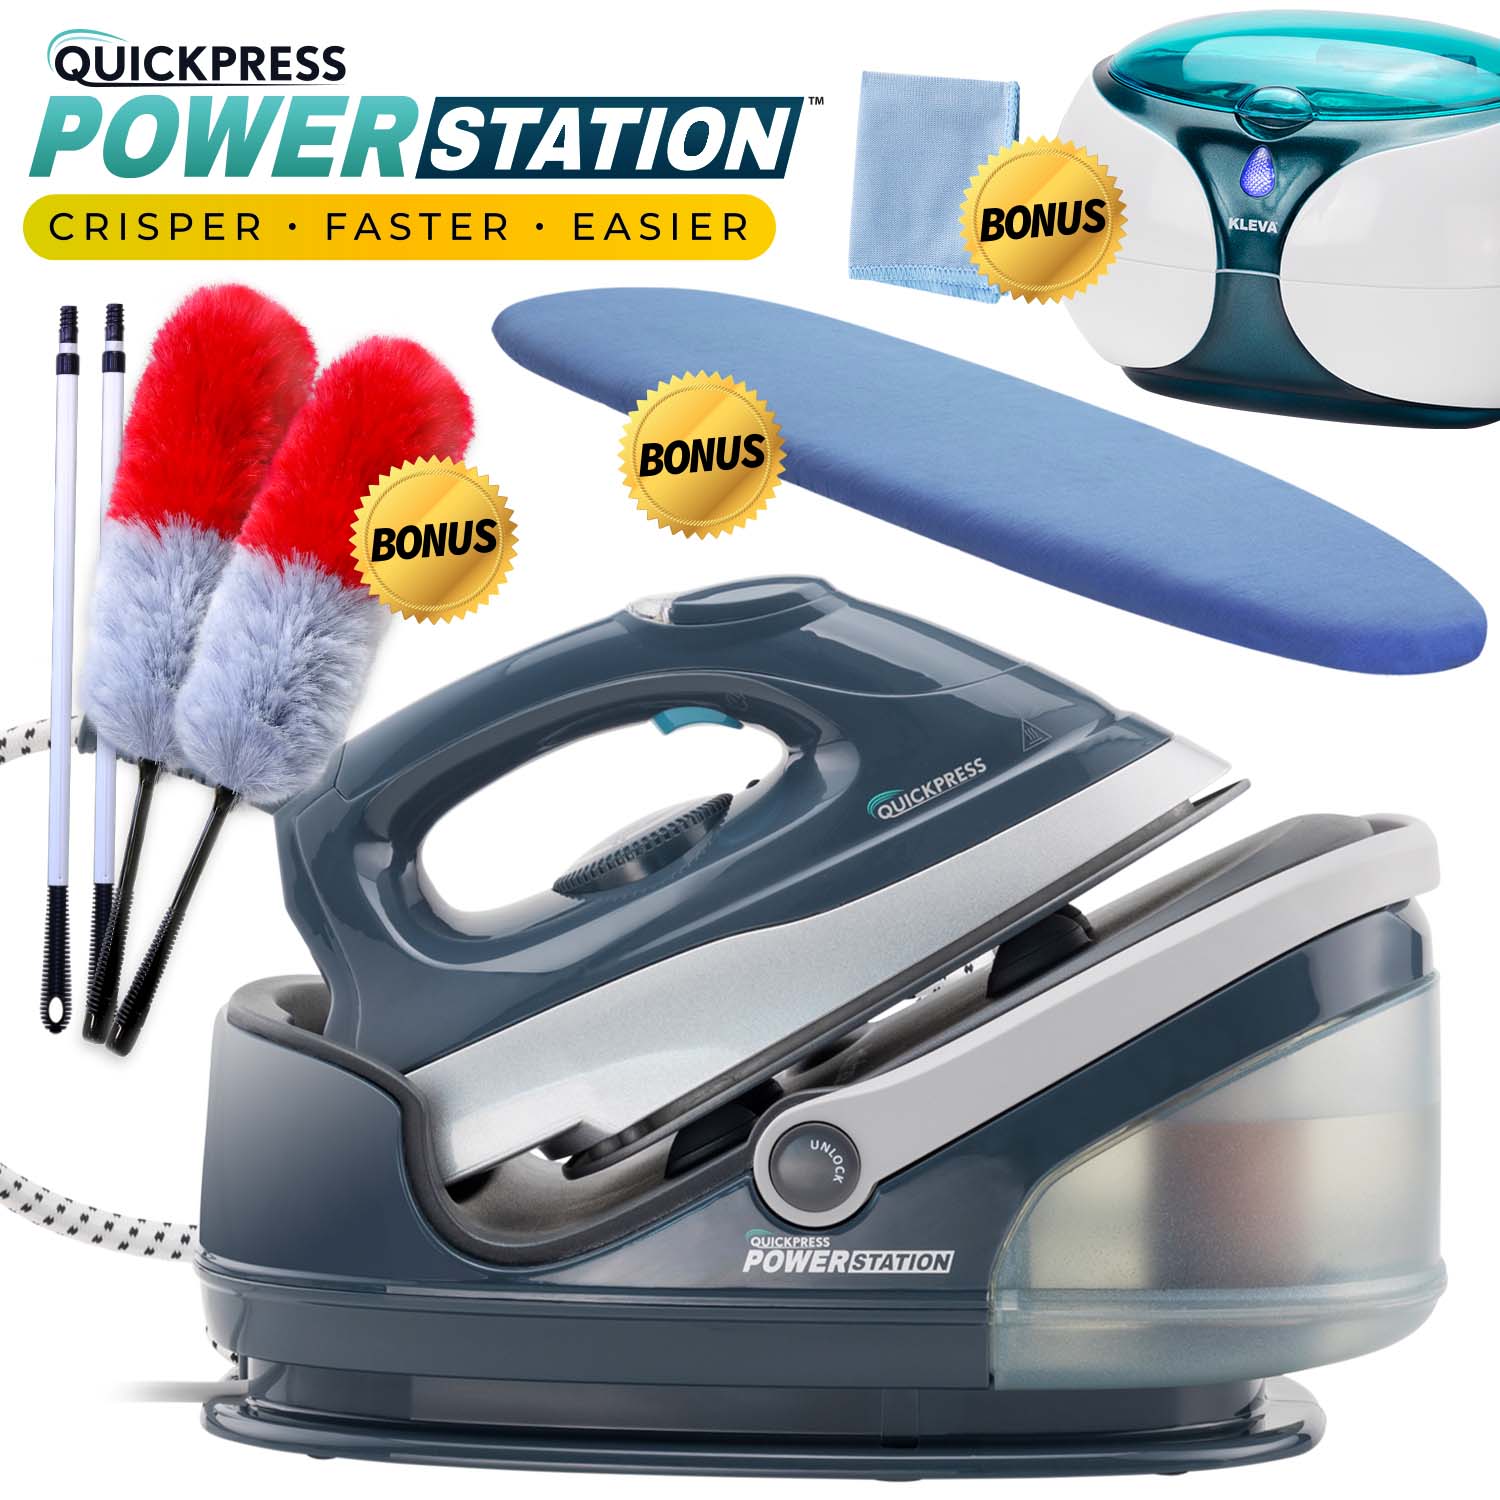 Image of NEW Quickpress Power Station Guaranteed To Cut Your Ironing Time In Half! + FREE Gifts!